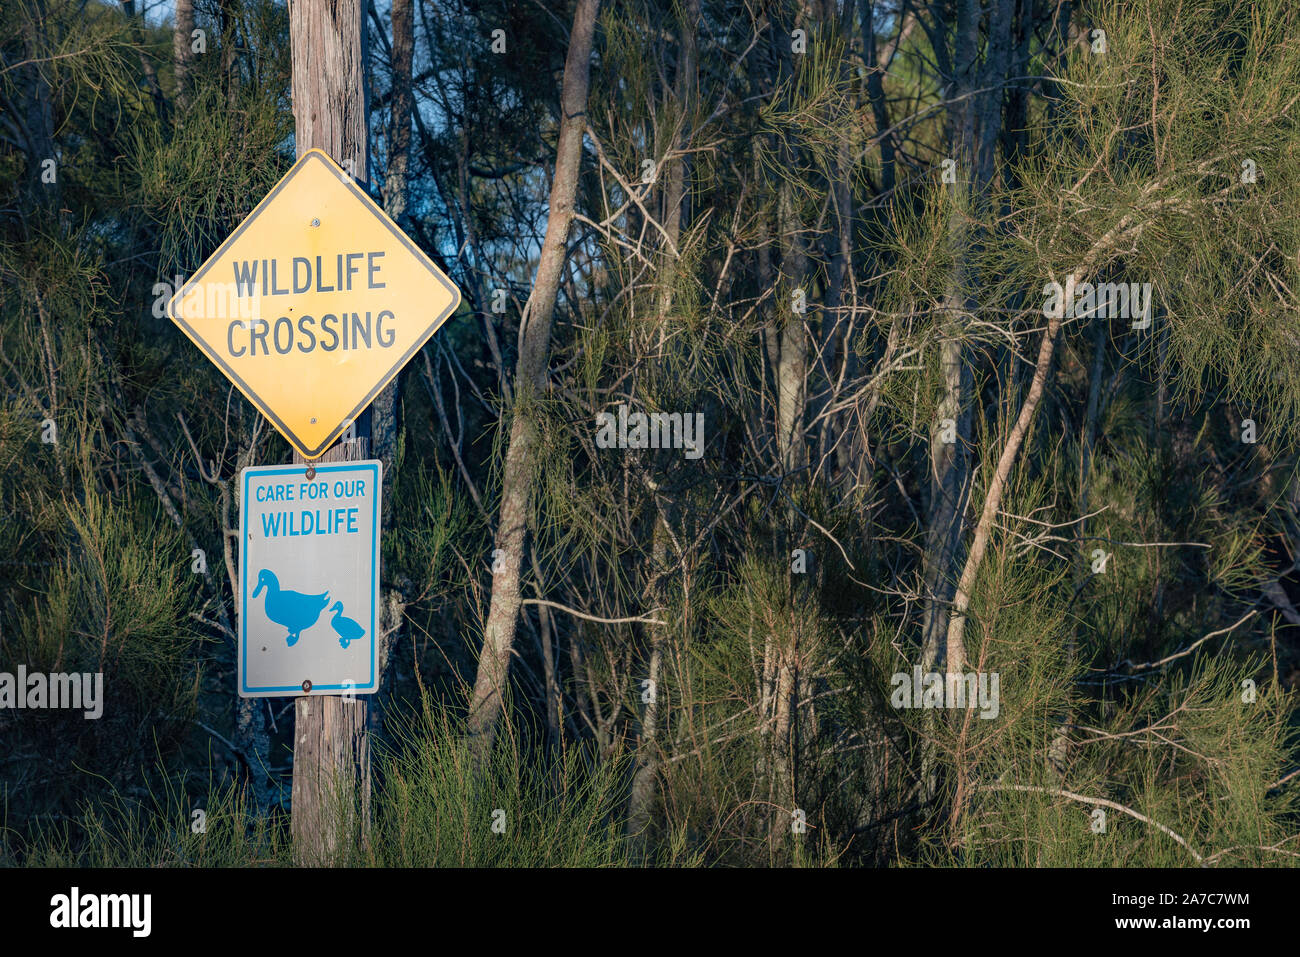 A sign attached to a timber power pole in the southern Sydney suburb of Bundeena warning drivers to look out and care for wildlife in the area Stock Photo